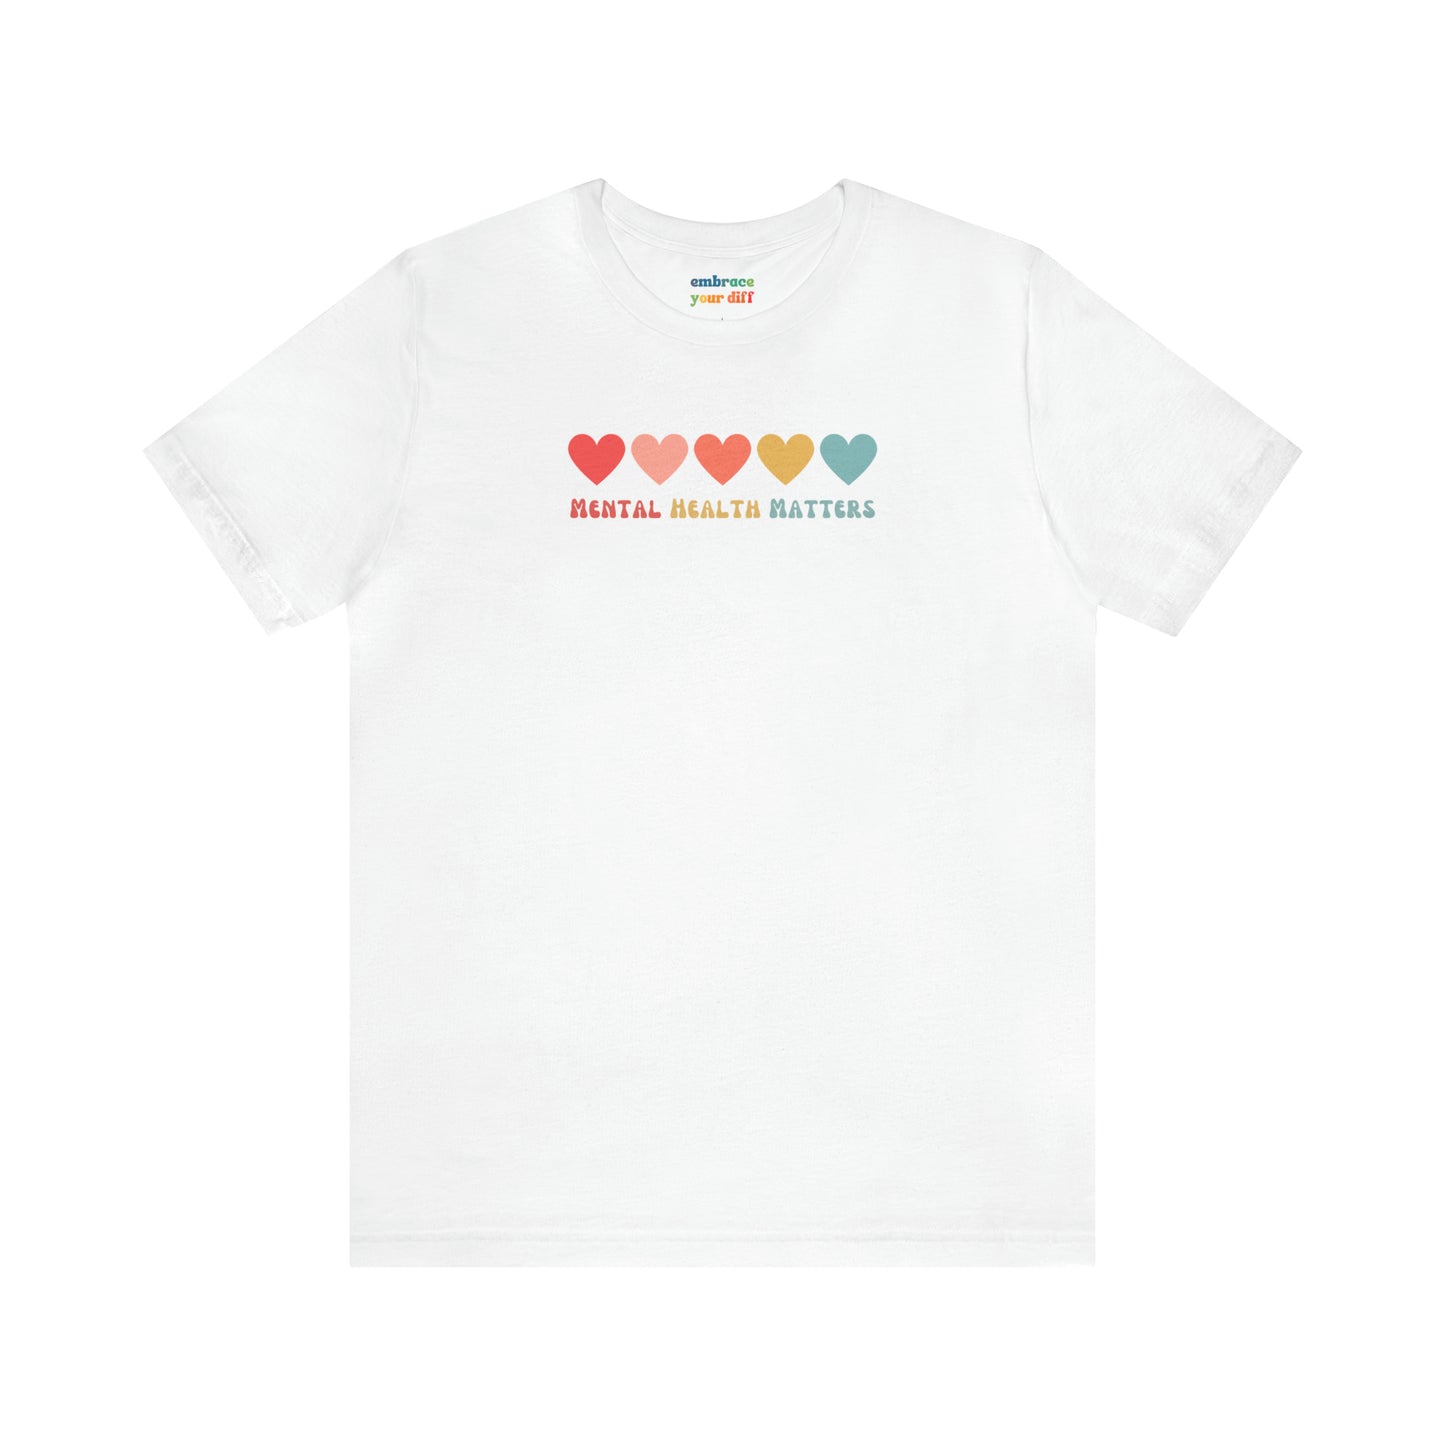 Rainbow Unisex T-shirt for Mental Health Acceptance - Adult Inclusivity Matters - Diversity Acceptance Shirt for Adults - Embrace Your Diff